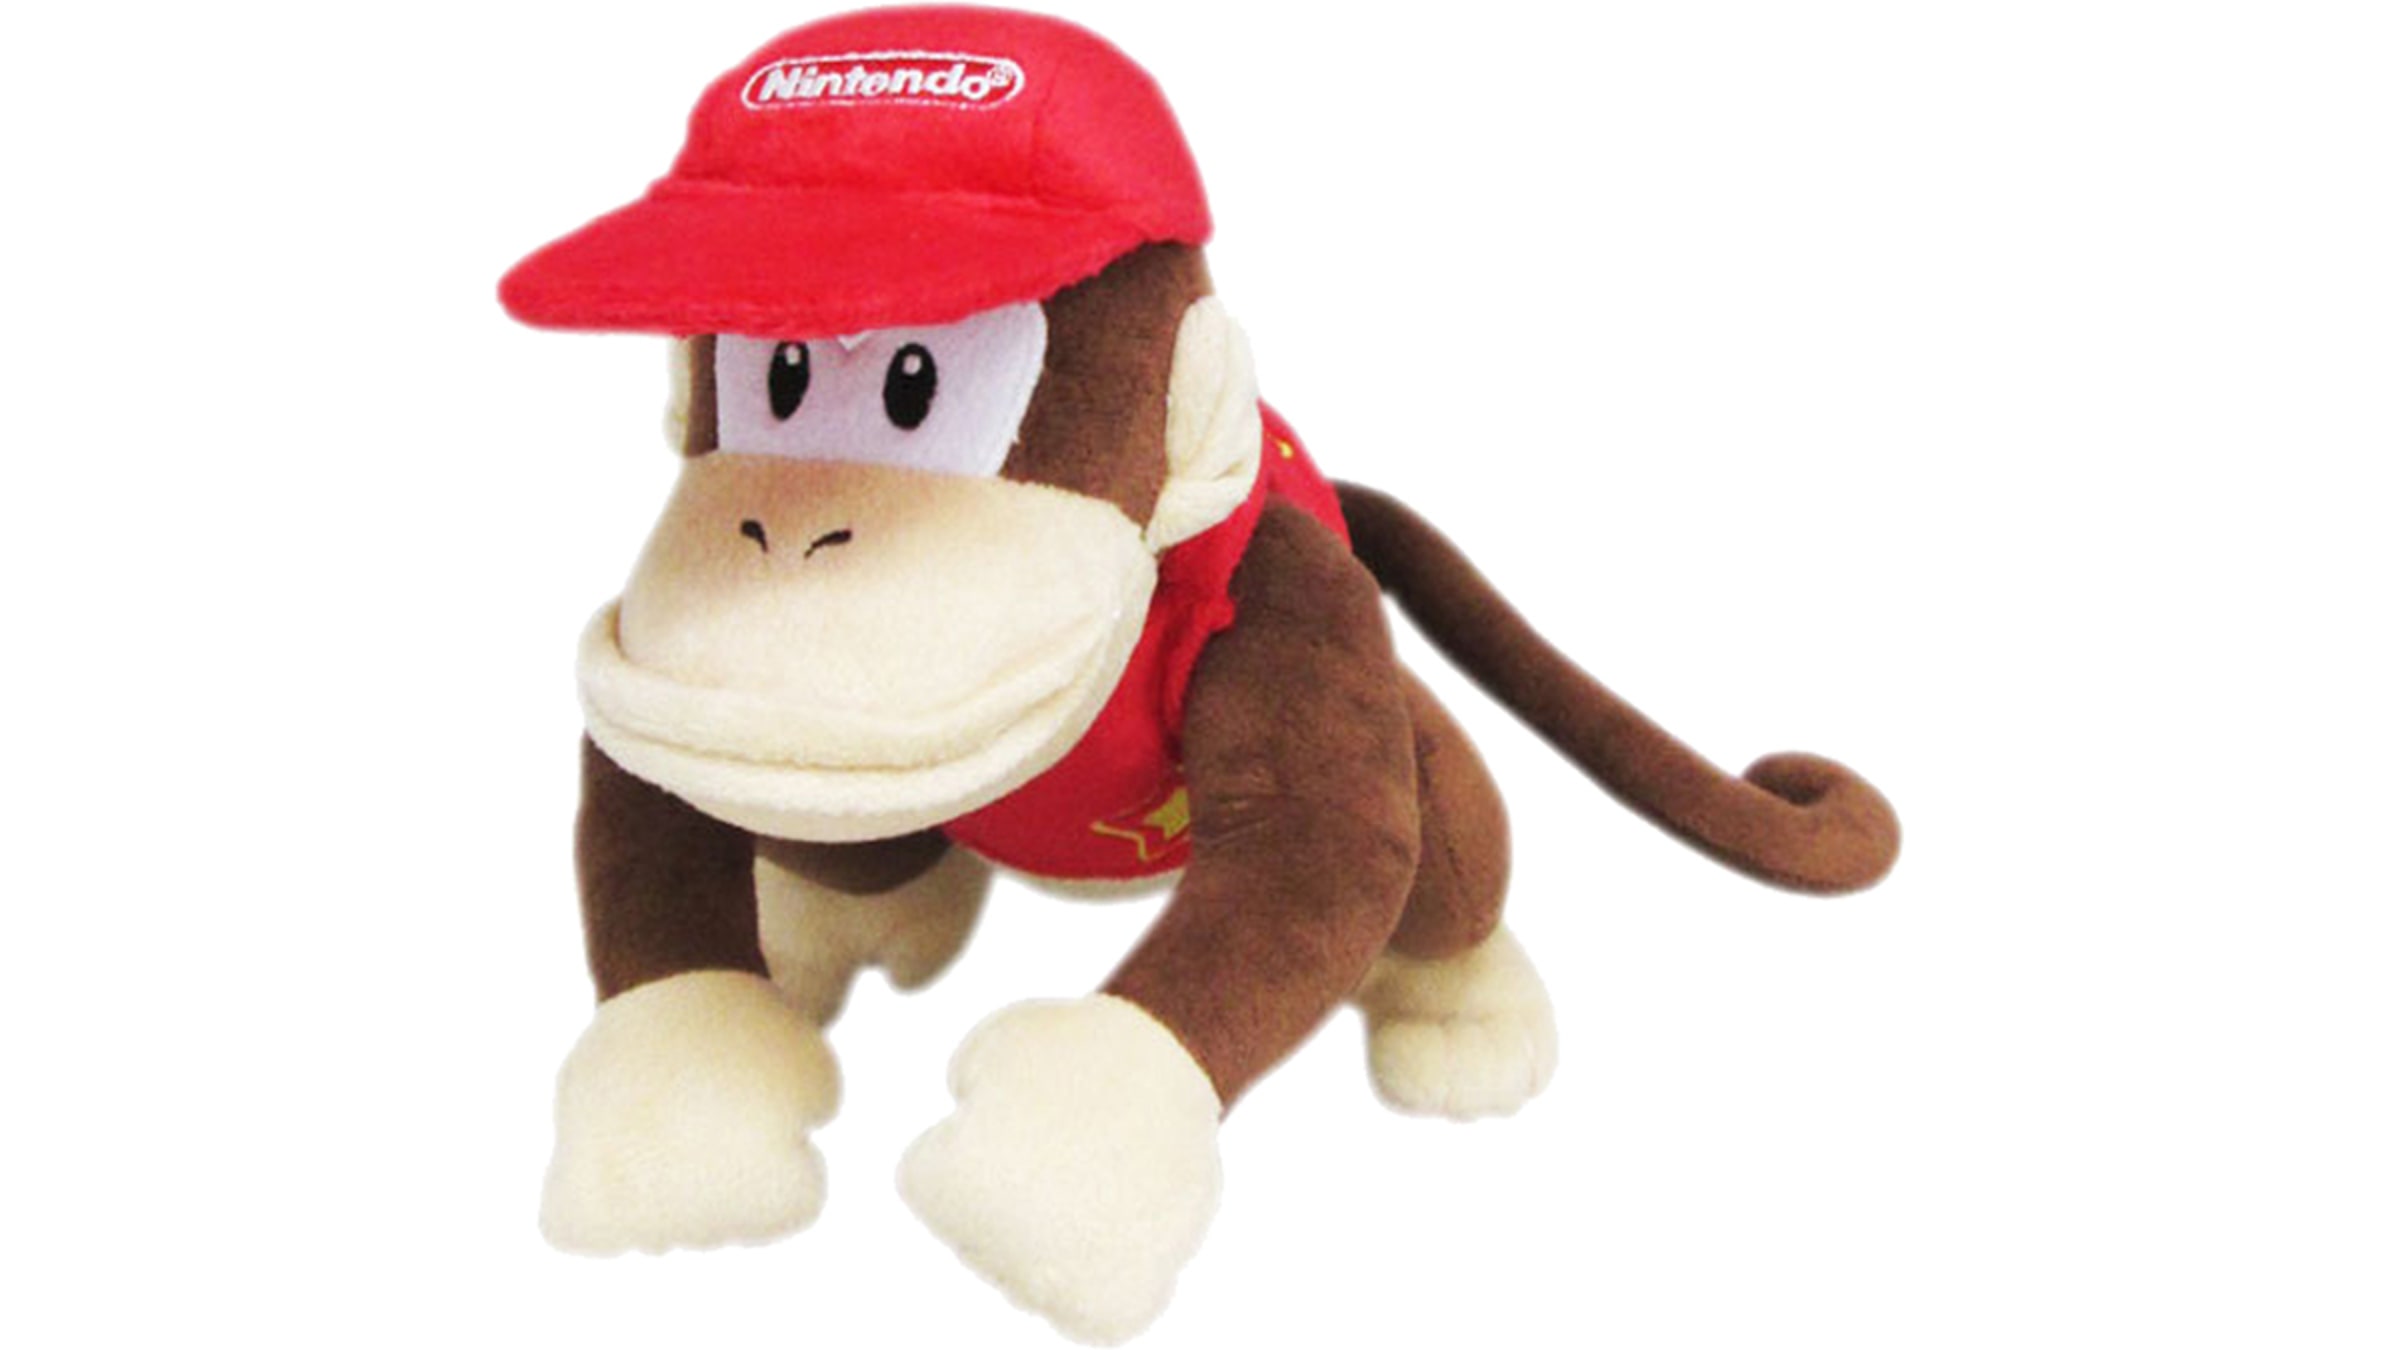 Diddy Kong 7